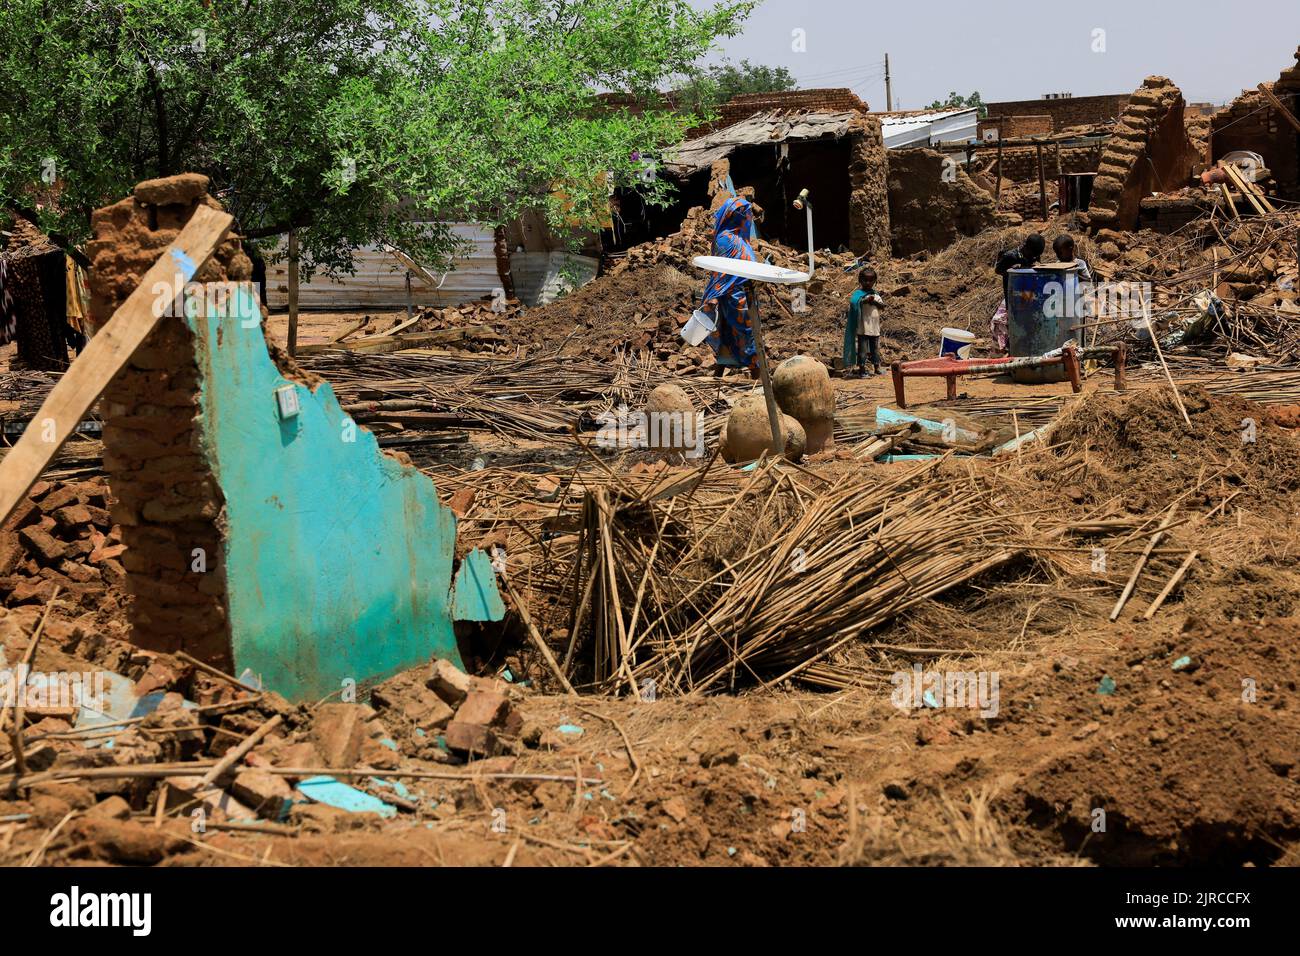 Family members stand in the ruins of their house, in Al-Managil locality during floods in Jazeera State, Sudan, August 23, 2022. REUTERS/Mohamed Nureldin Abdallah Stock Photo